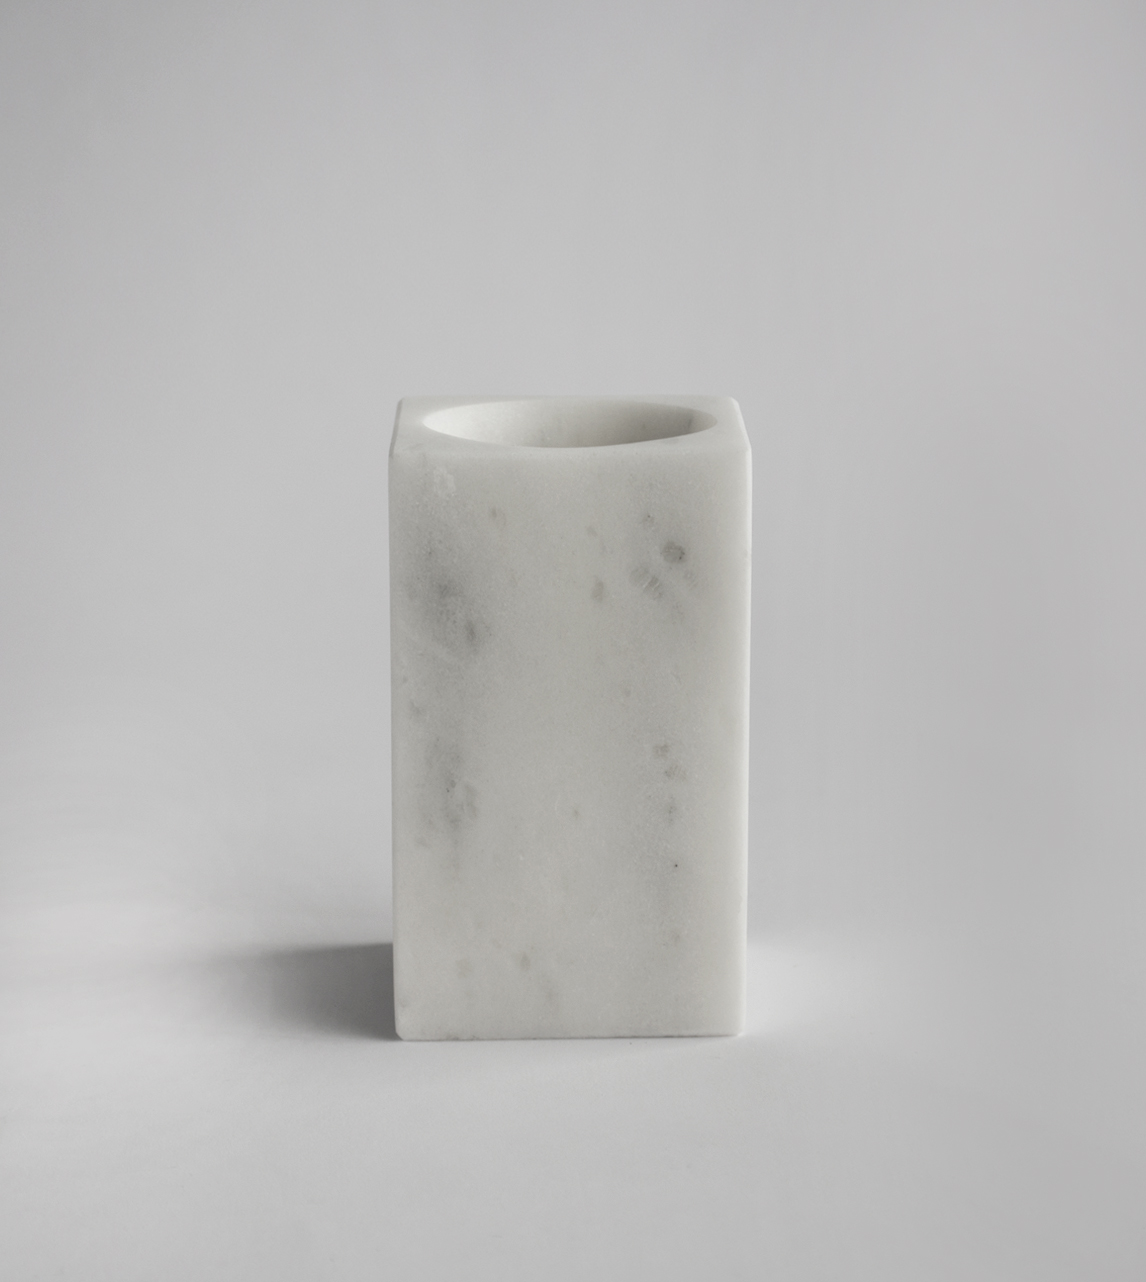 Kiwano Concept White Marble Square Pen and Toothbrush Holder